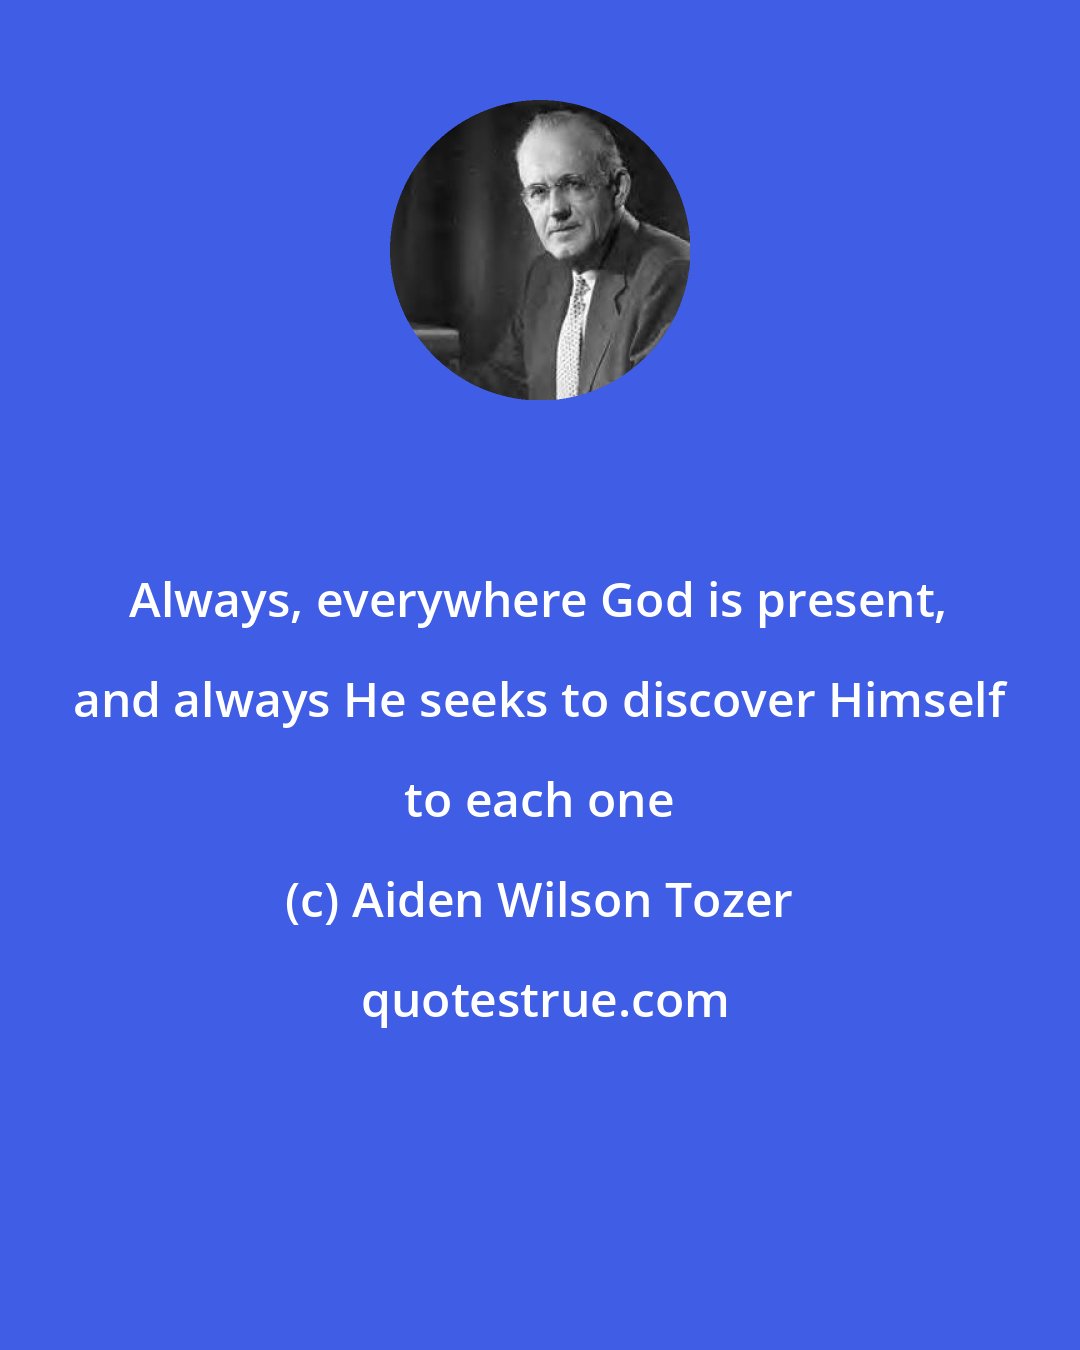 Aiden Wilson Tozer: Always, everywhere God is present, and always He seeks to discover Himself to each one